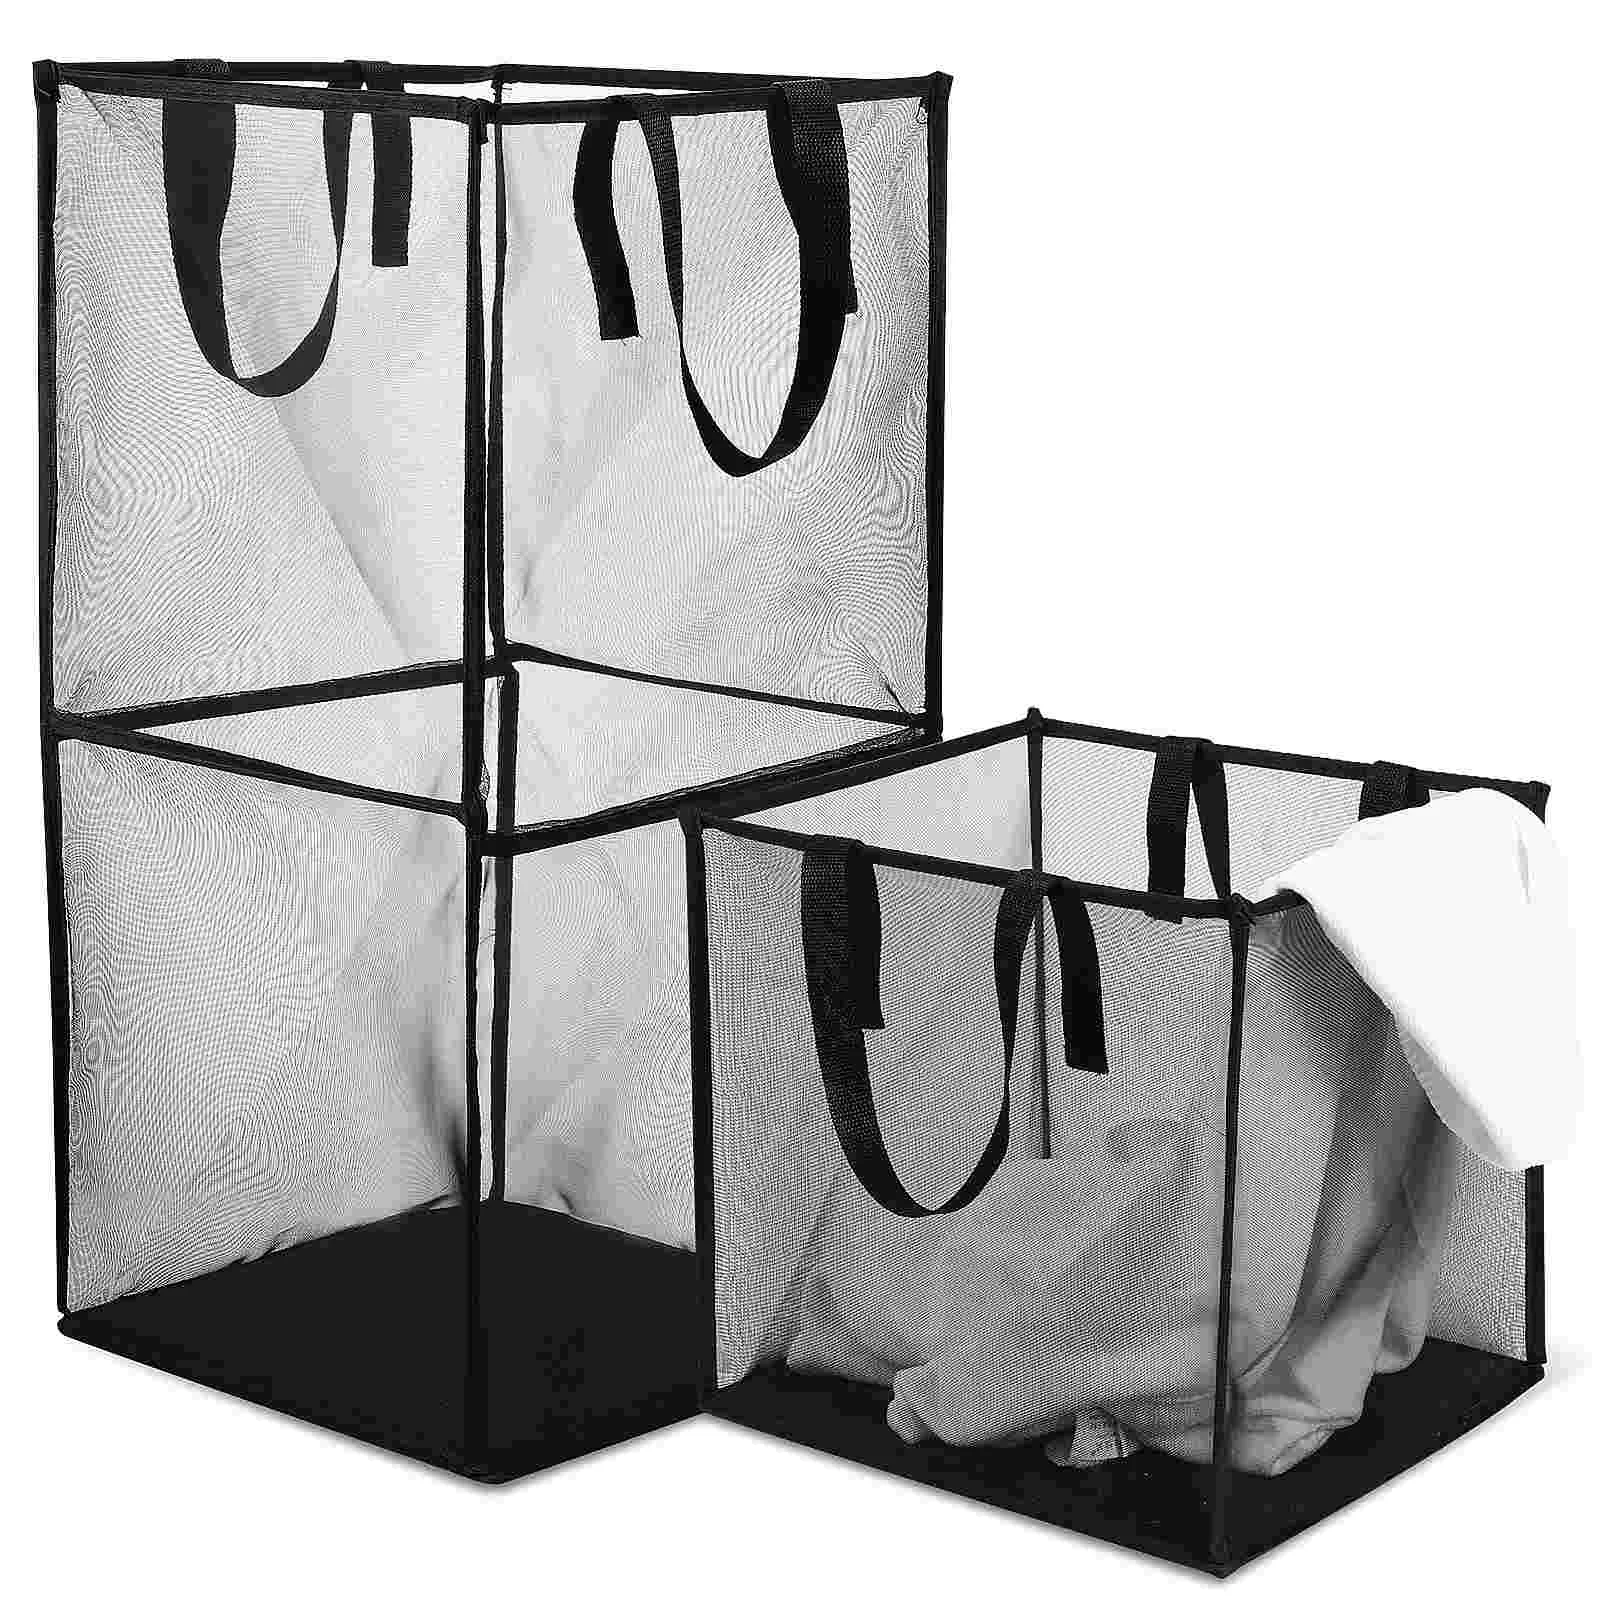 

2 Pcs Folding Laundry Hamper Mesh Collapsible Dirty Clothes Foldable Basket Organizer Sundries Household Holder Hampers